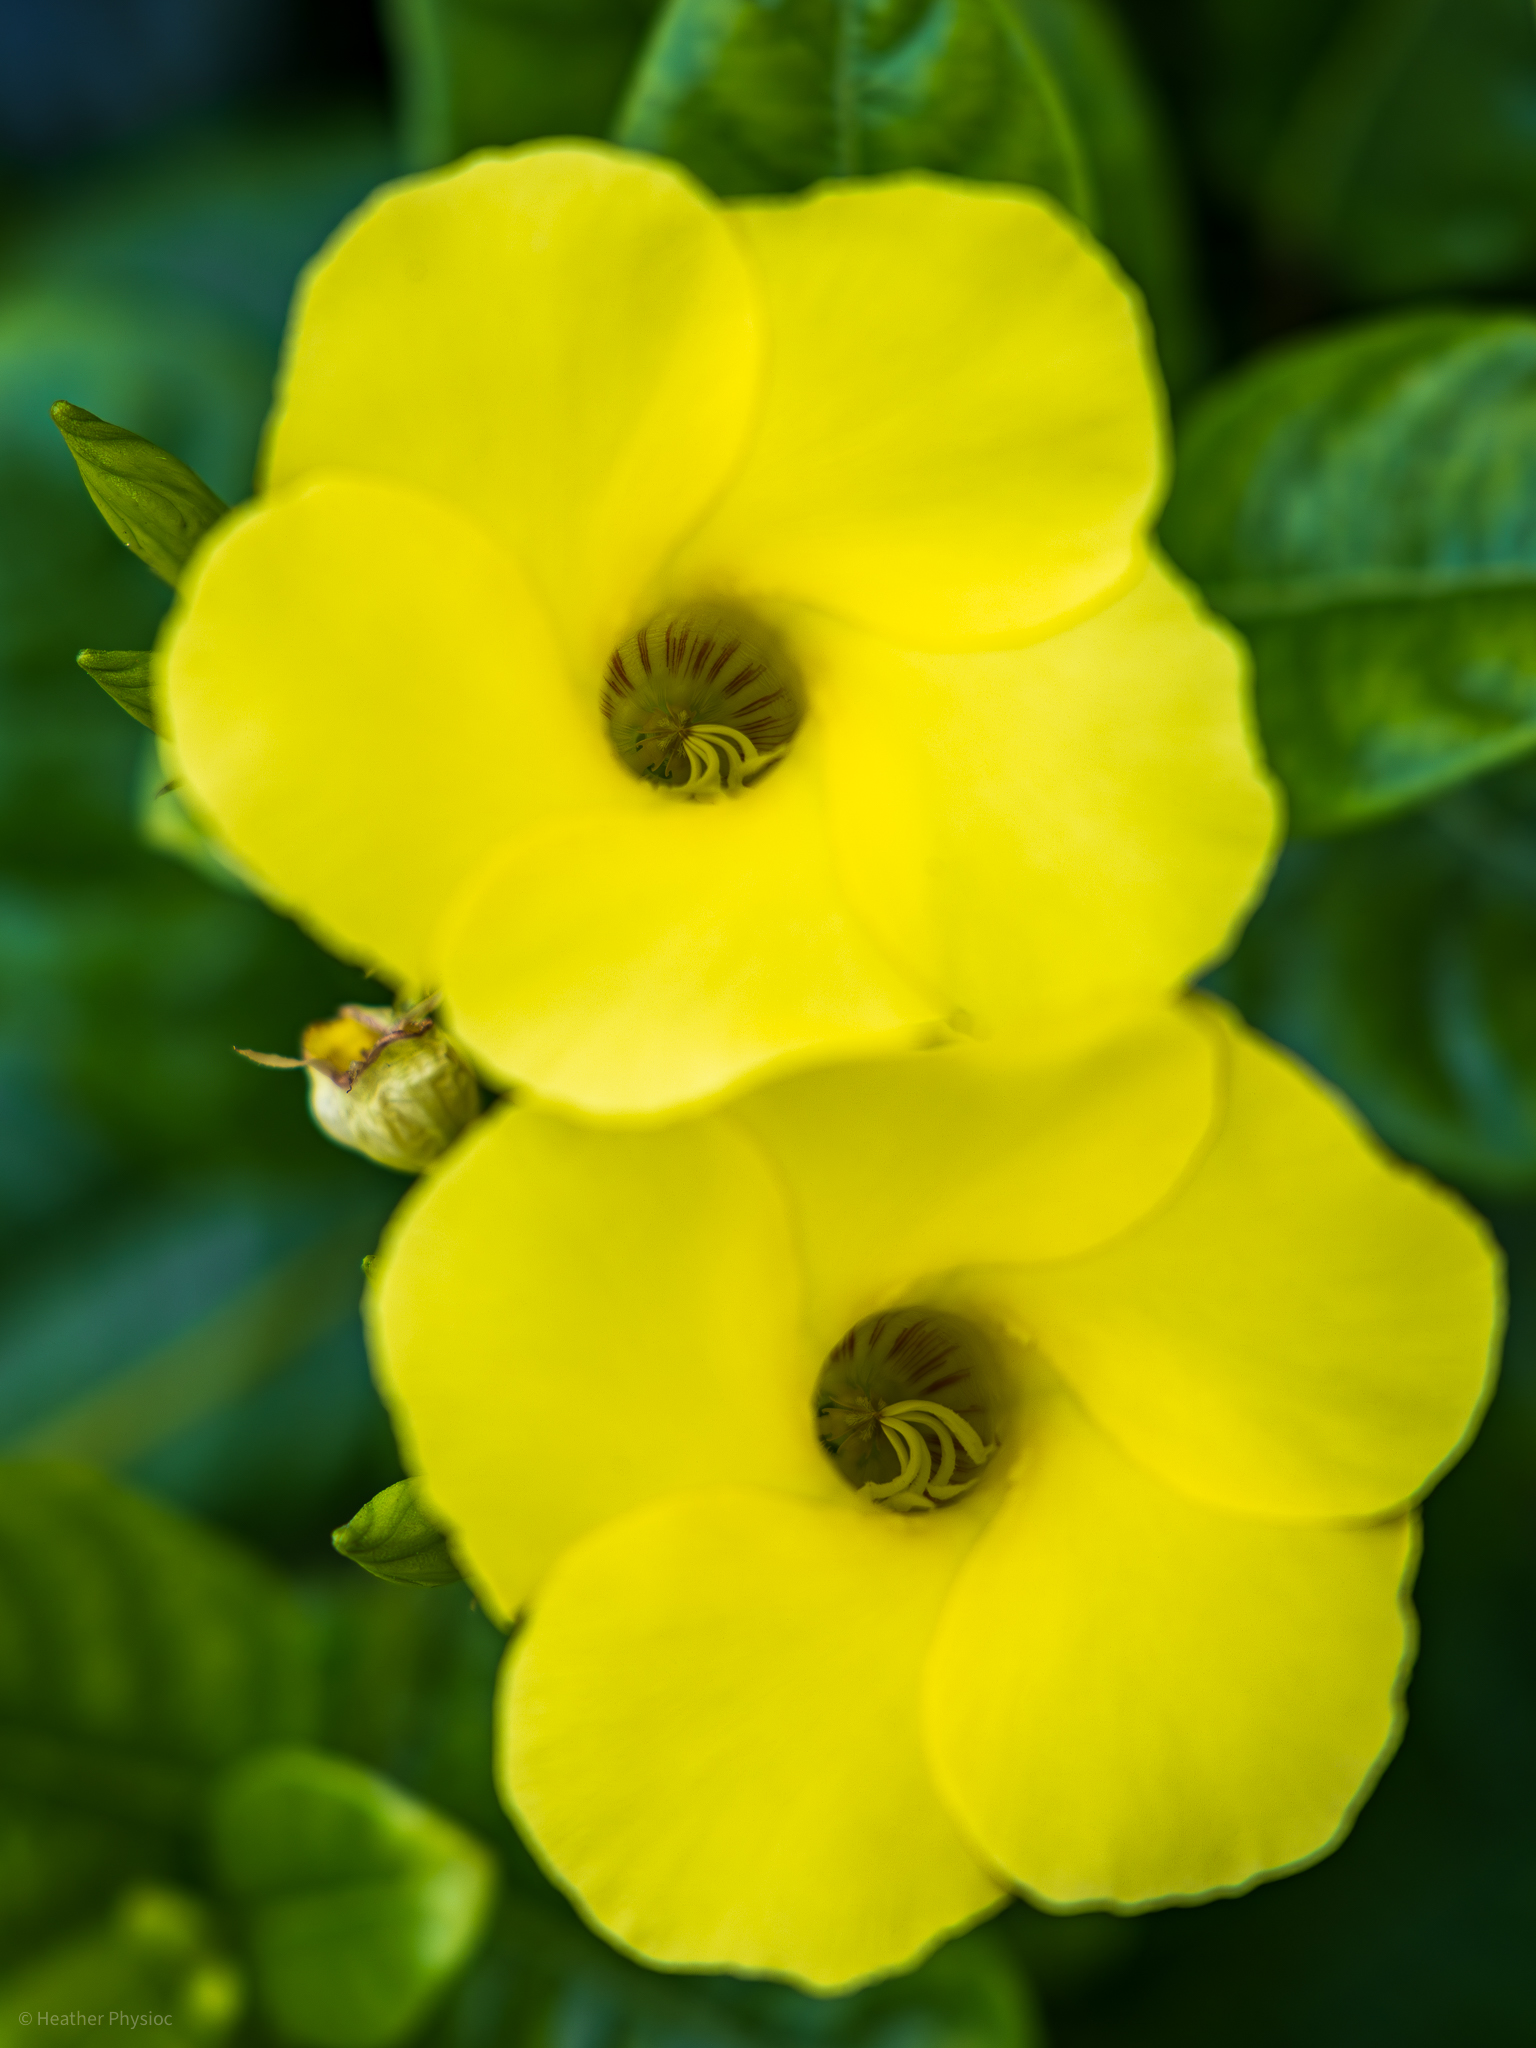 Vivid yellow Mandevilla flowers blooming, their trumpet-shaped blossoms highlighted against the green leaves in a Yucatan garden.